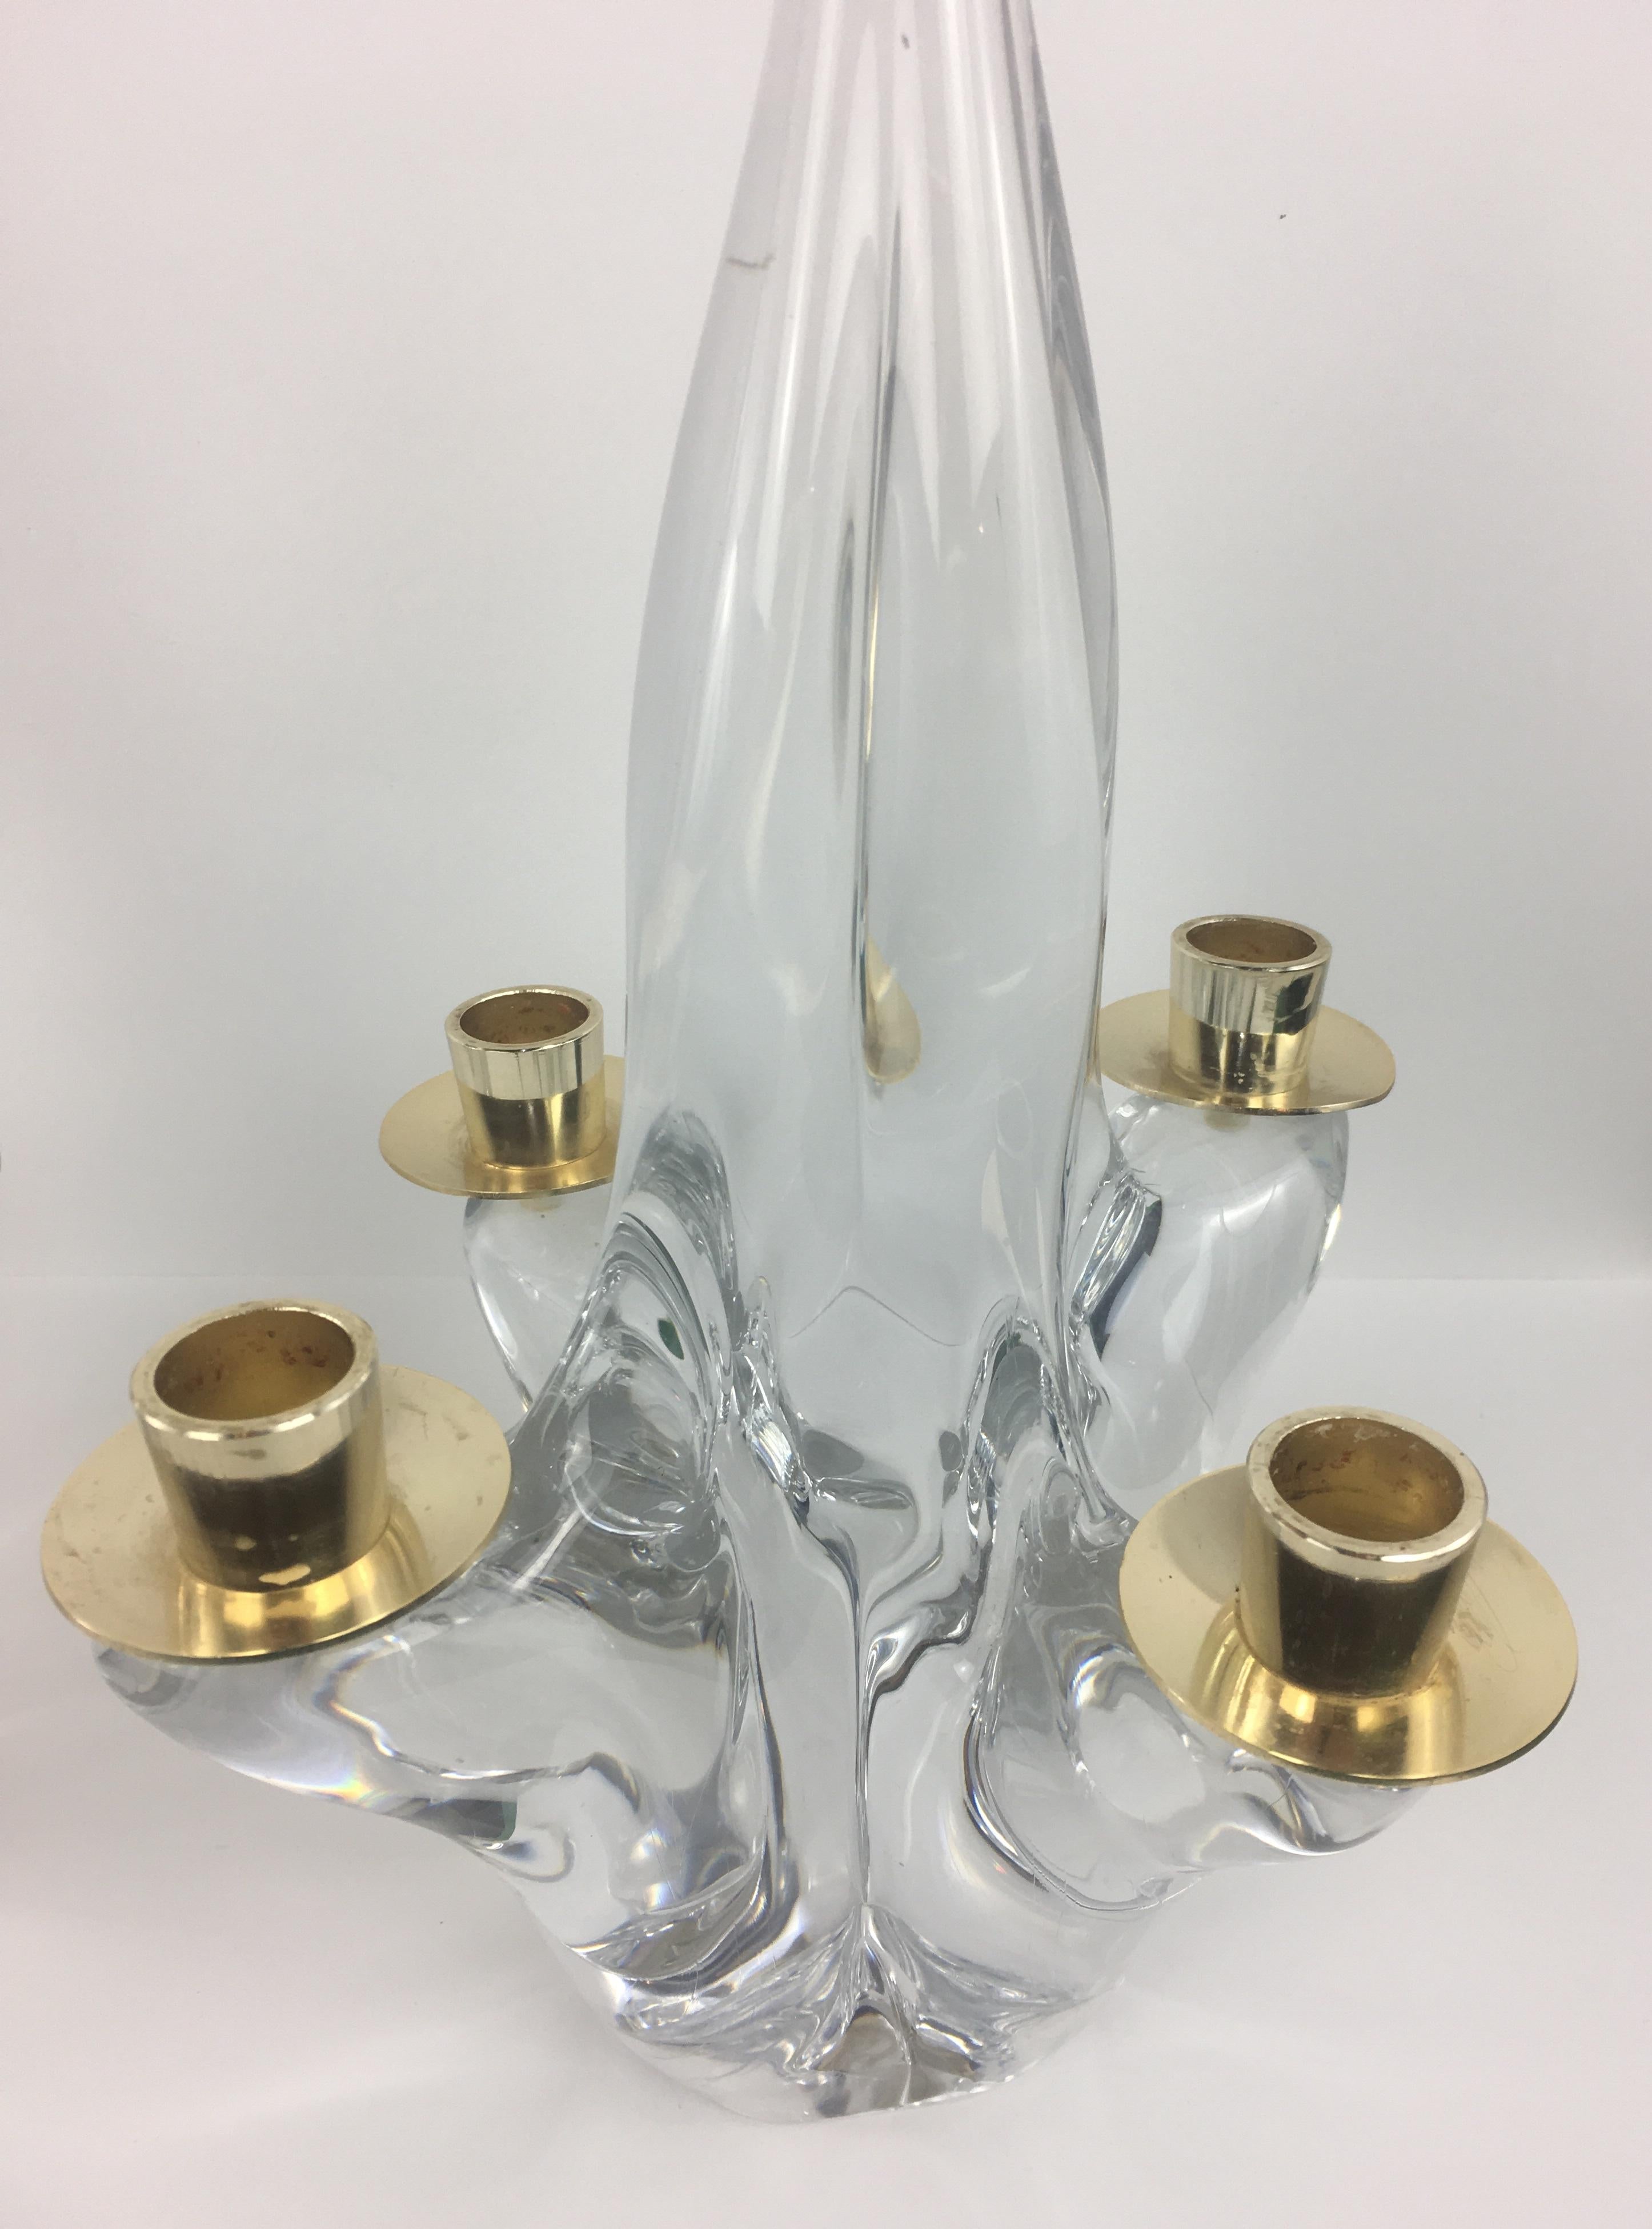 Pair of mid-century sculptural four arm crystal candle holders by Schneider, France. These modern candle holders are absolutely beautiful and in very good condition.  Unique and interesting typical of various innovative designs created by Schneider.